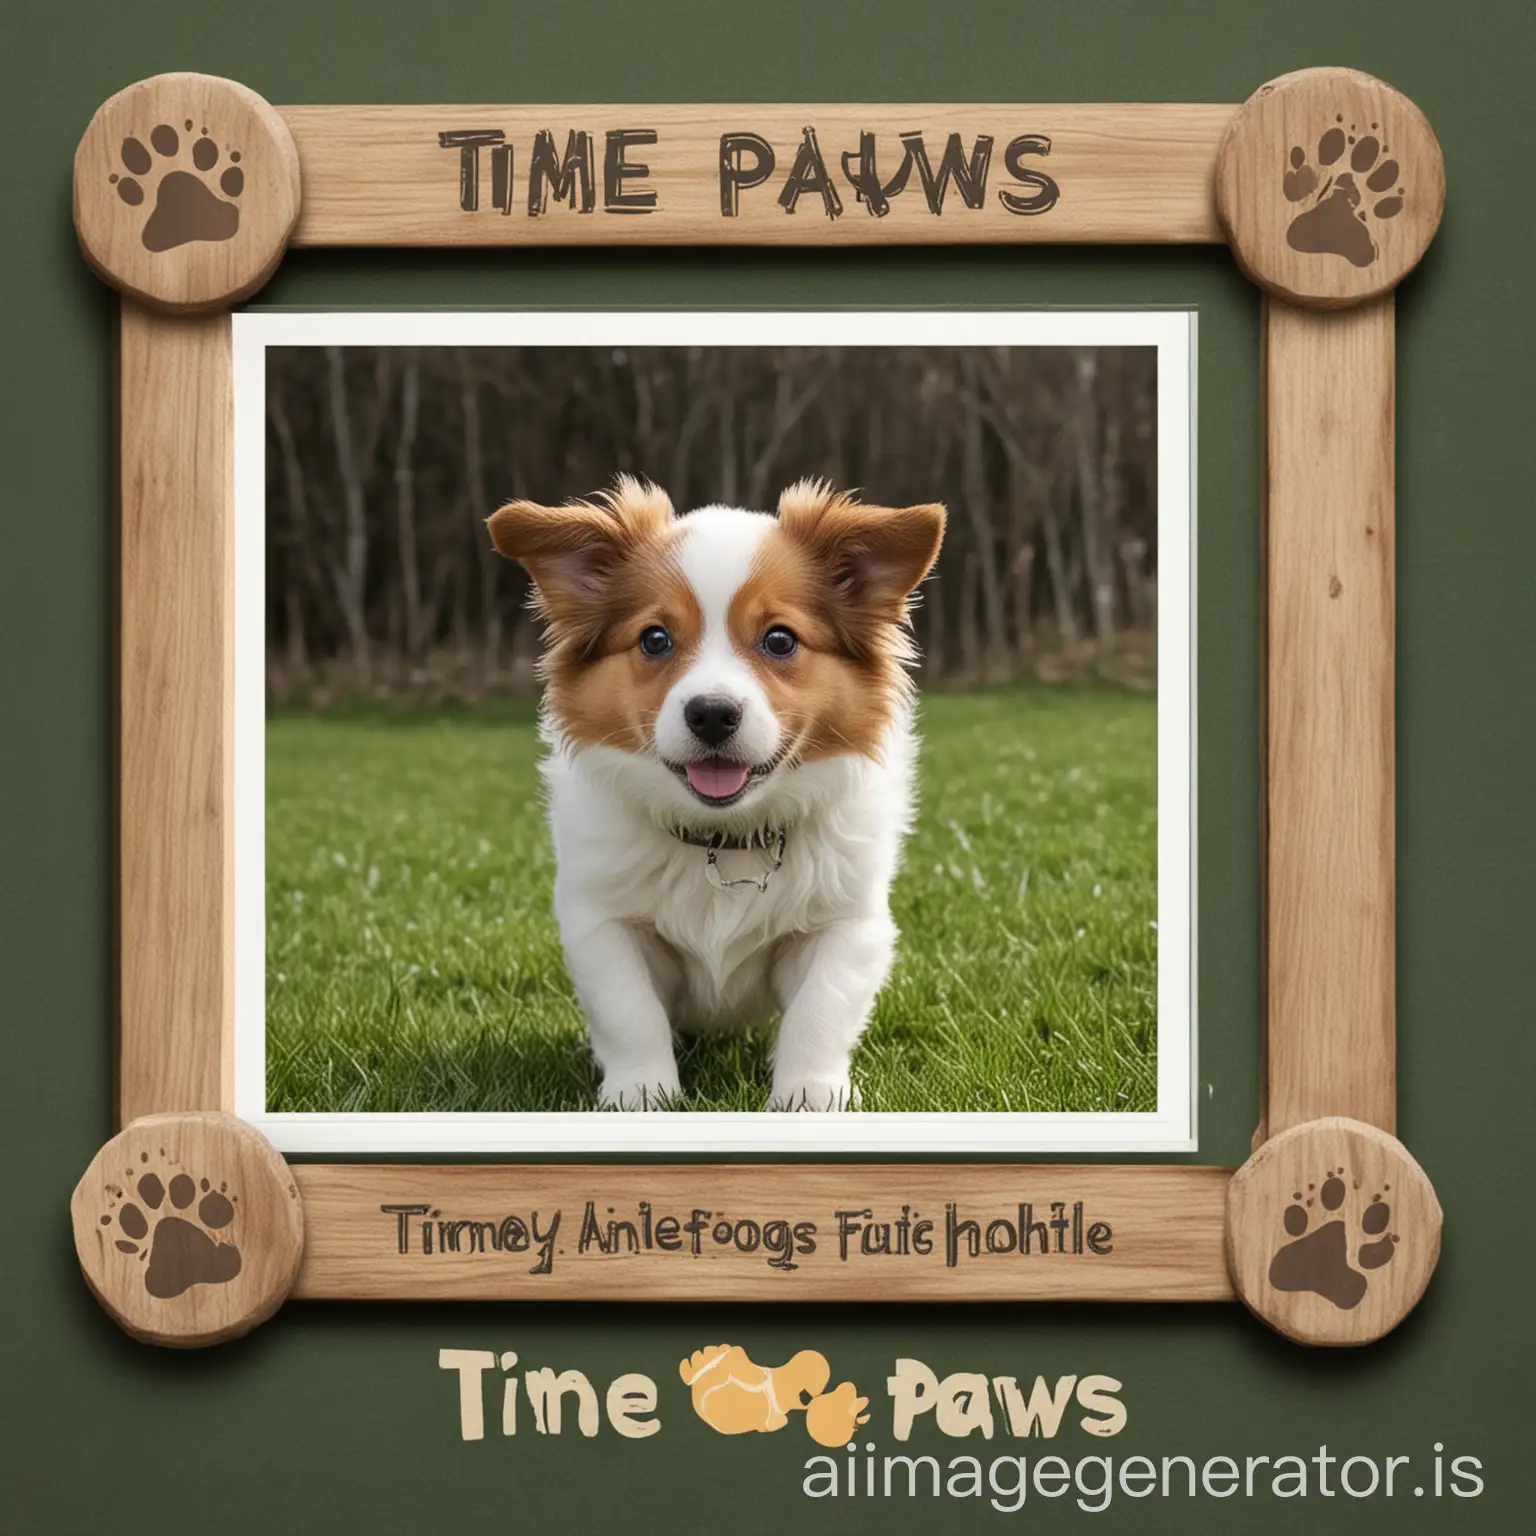 Time-Paws-Facebook-Profile-Frame-Dog-Playground-Fun-and-Adventure